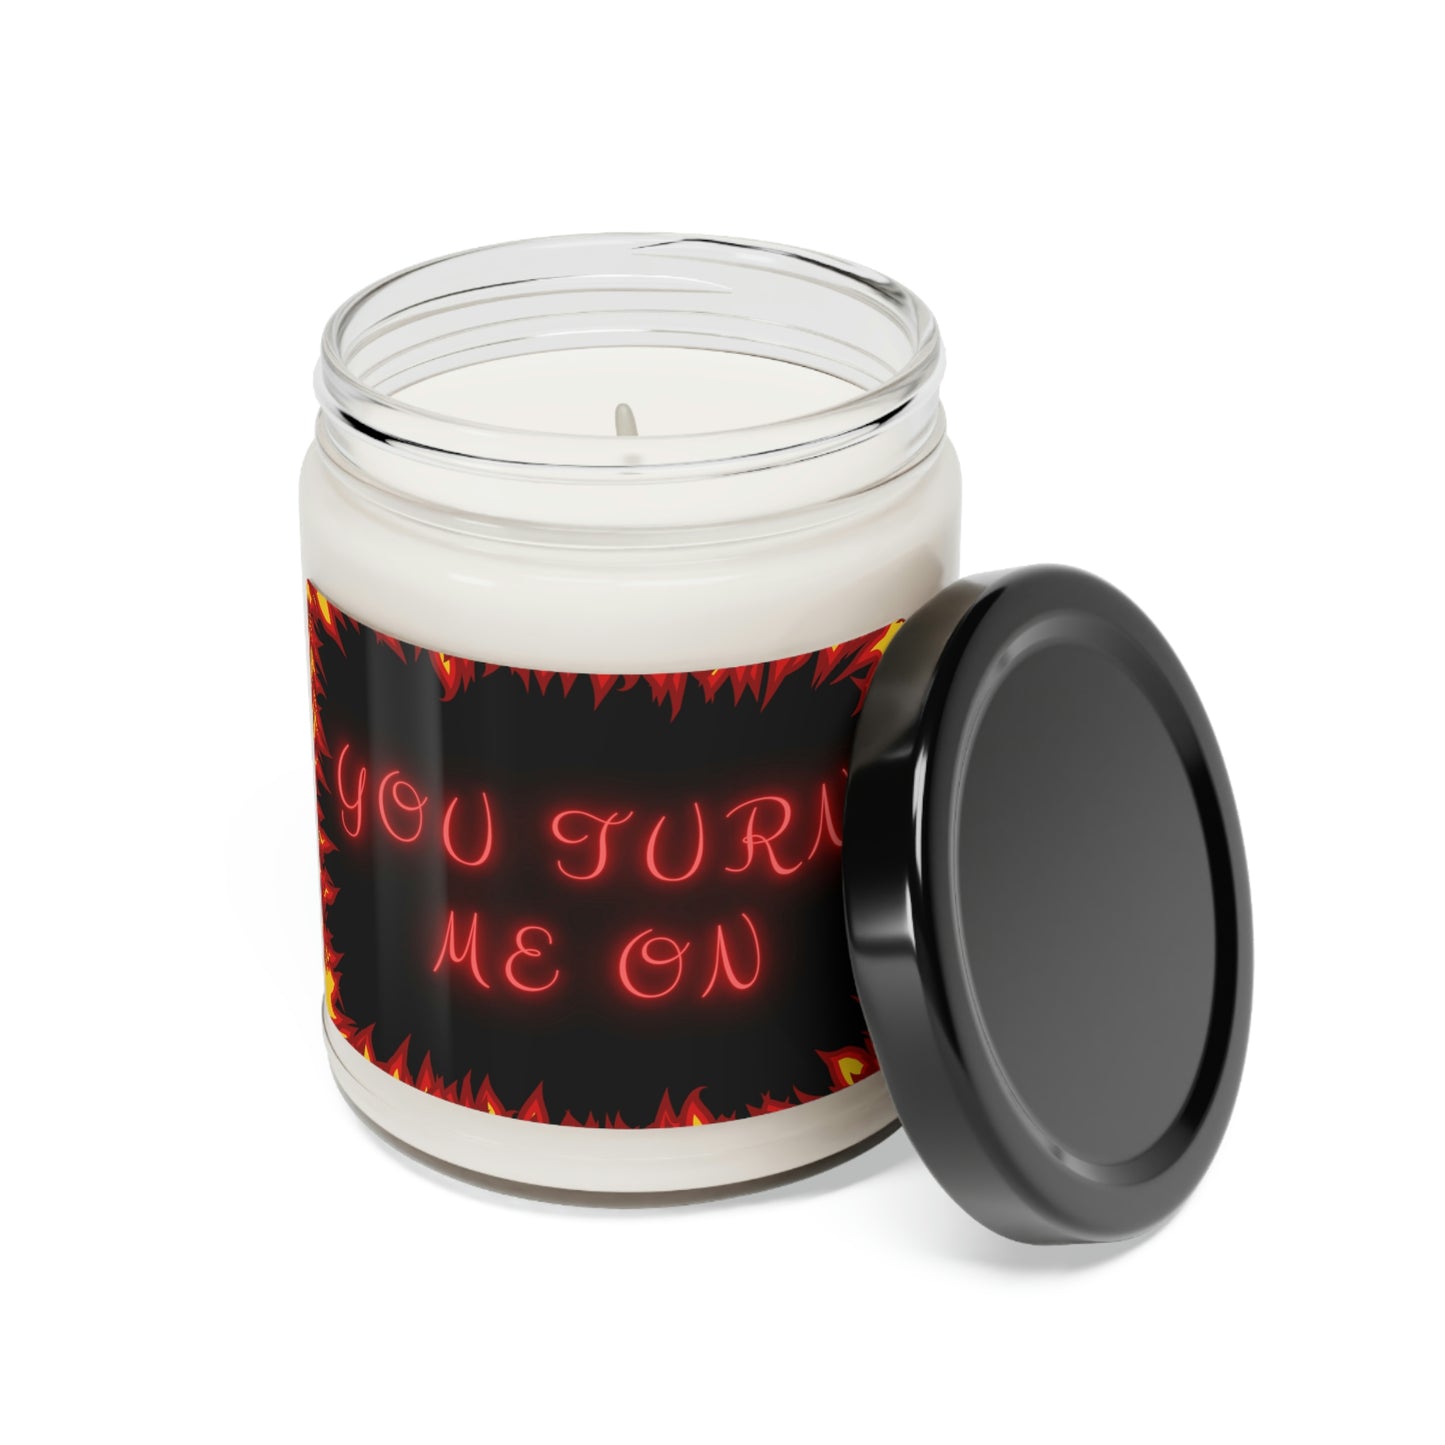 You Turn Me On, Scented Soy Candle, 9oz, Funny Candle Pun, Valentines Day Gift